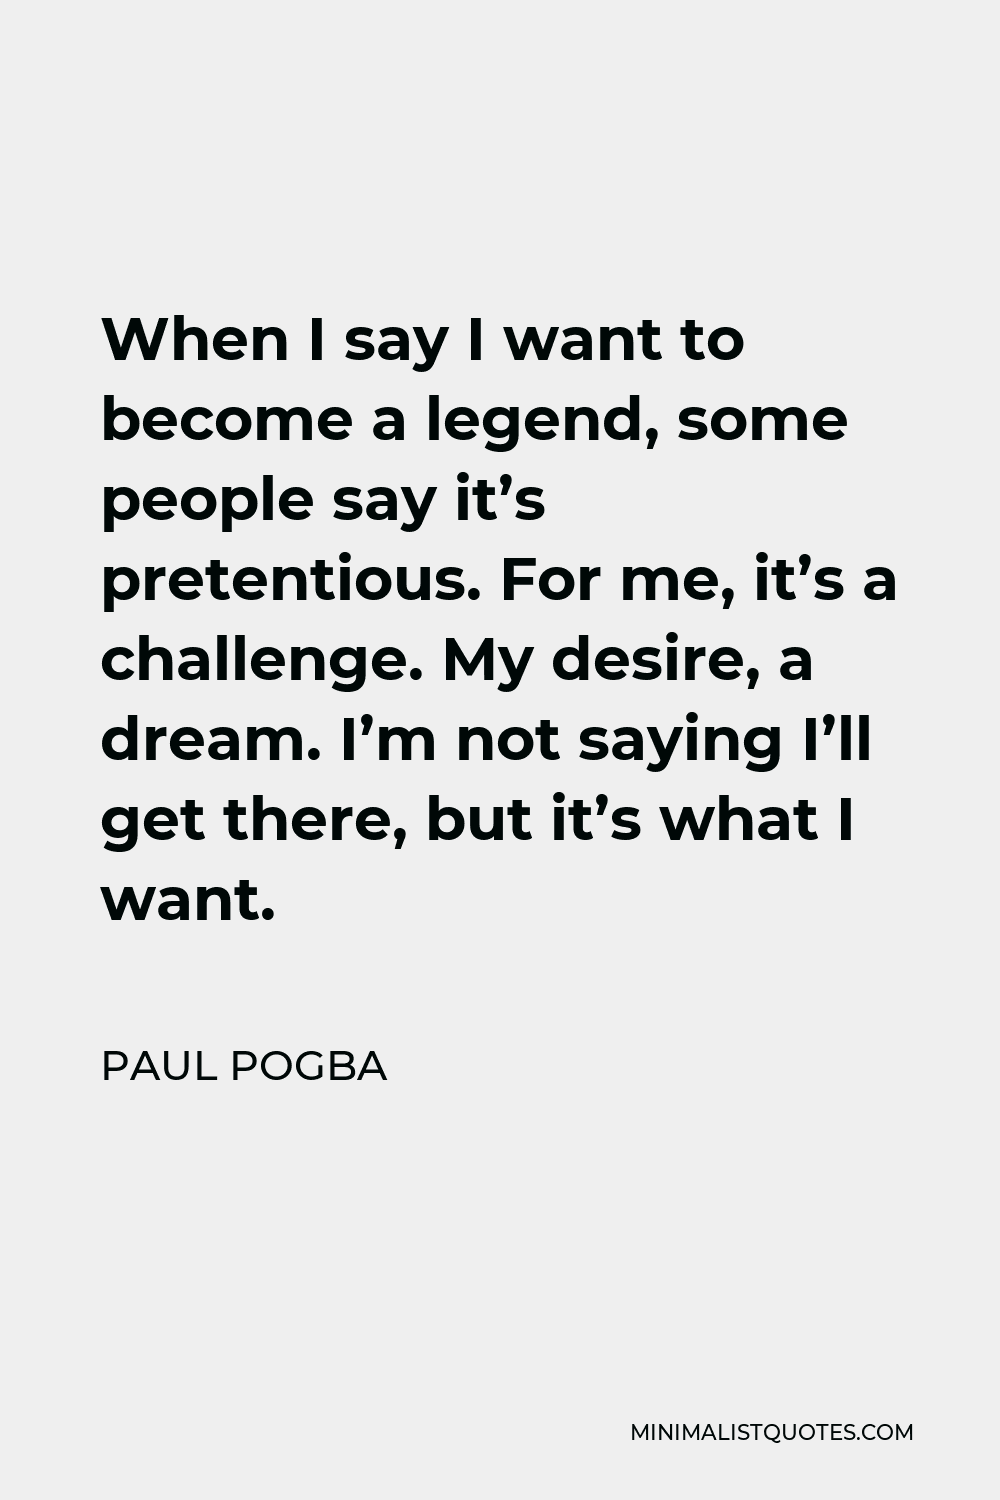 Paul Pogba Quote - When I say I want to become a legend, some people say it’s pretentious. For me, it’s a challenge. My desire, a dream. I’m not saying I’ll get there, but it’s what I want.